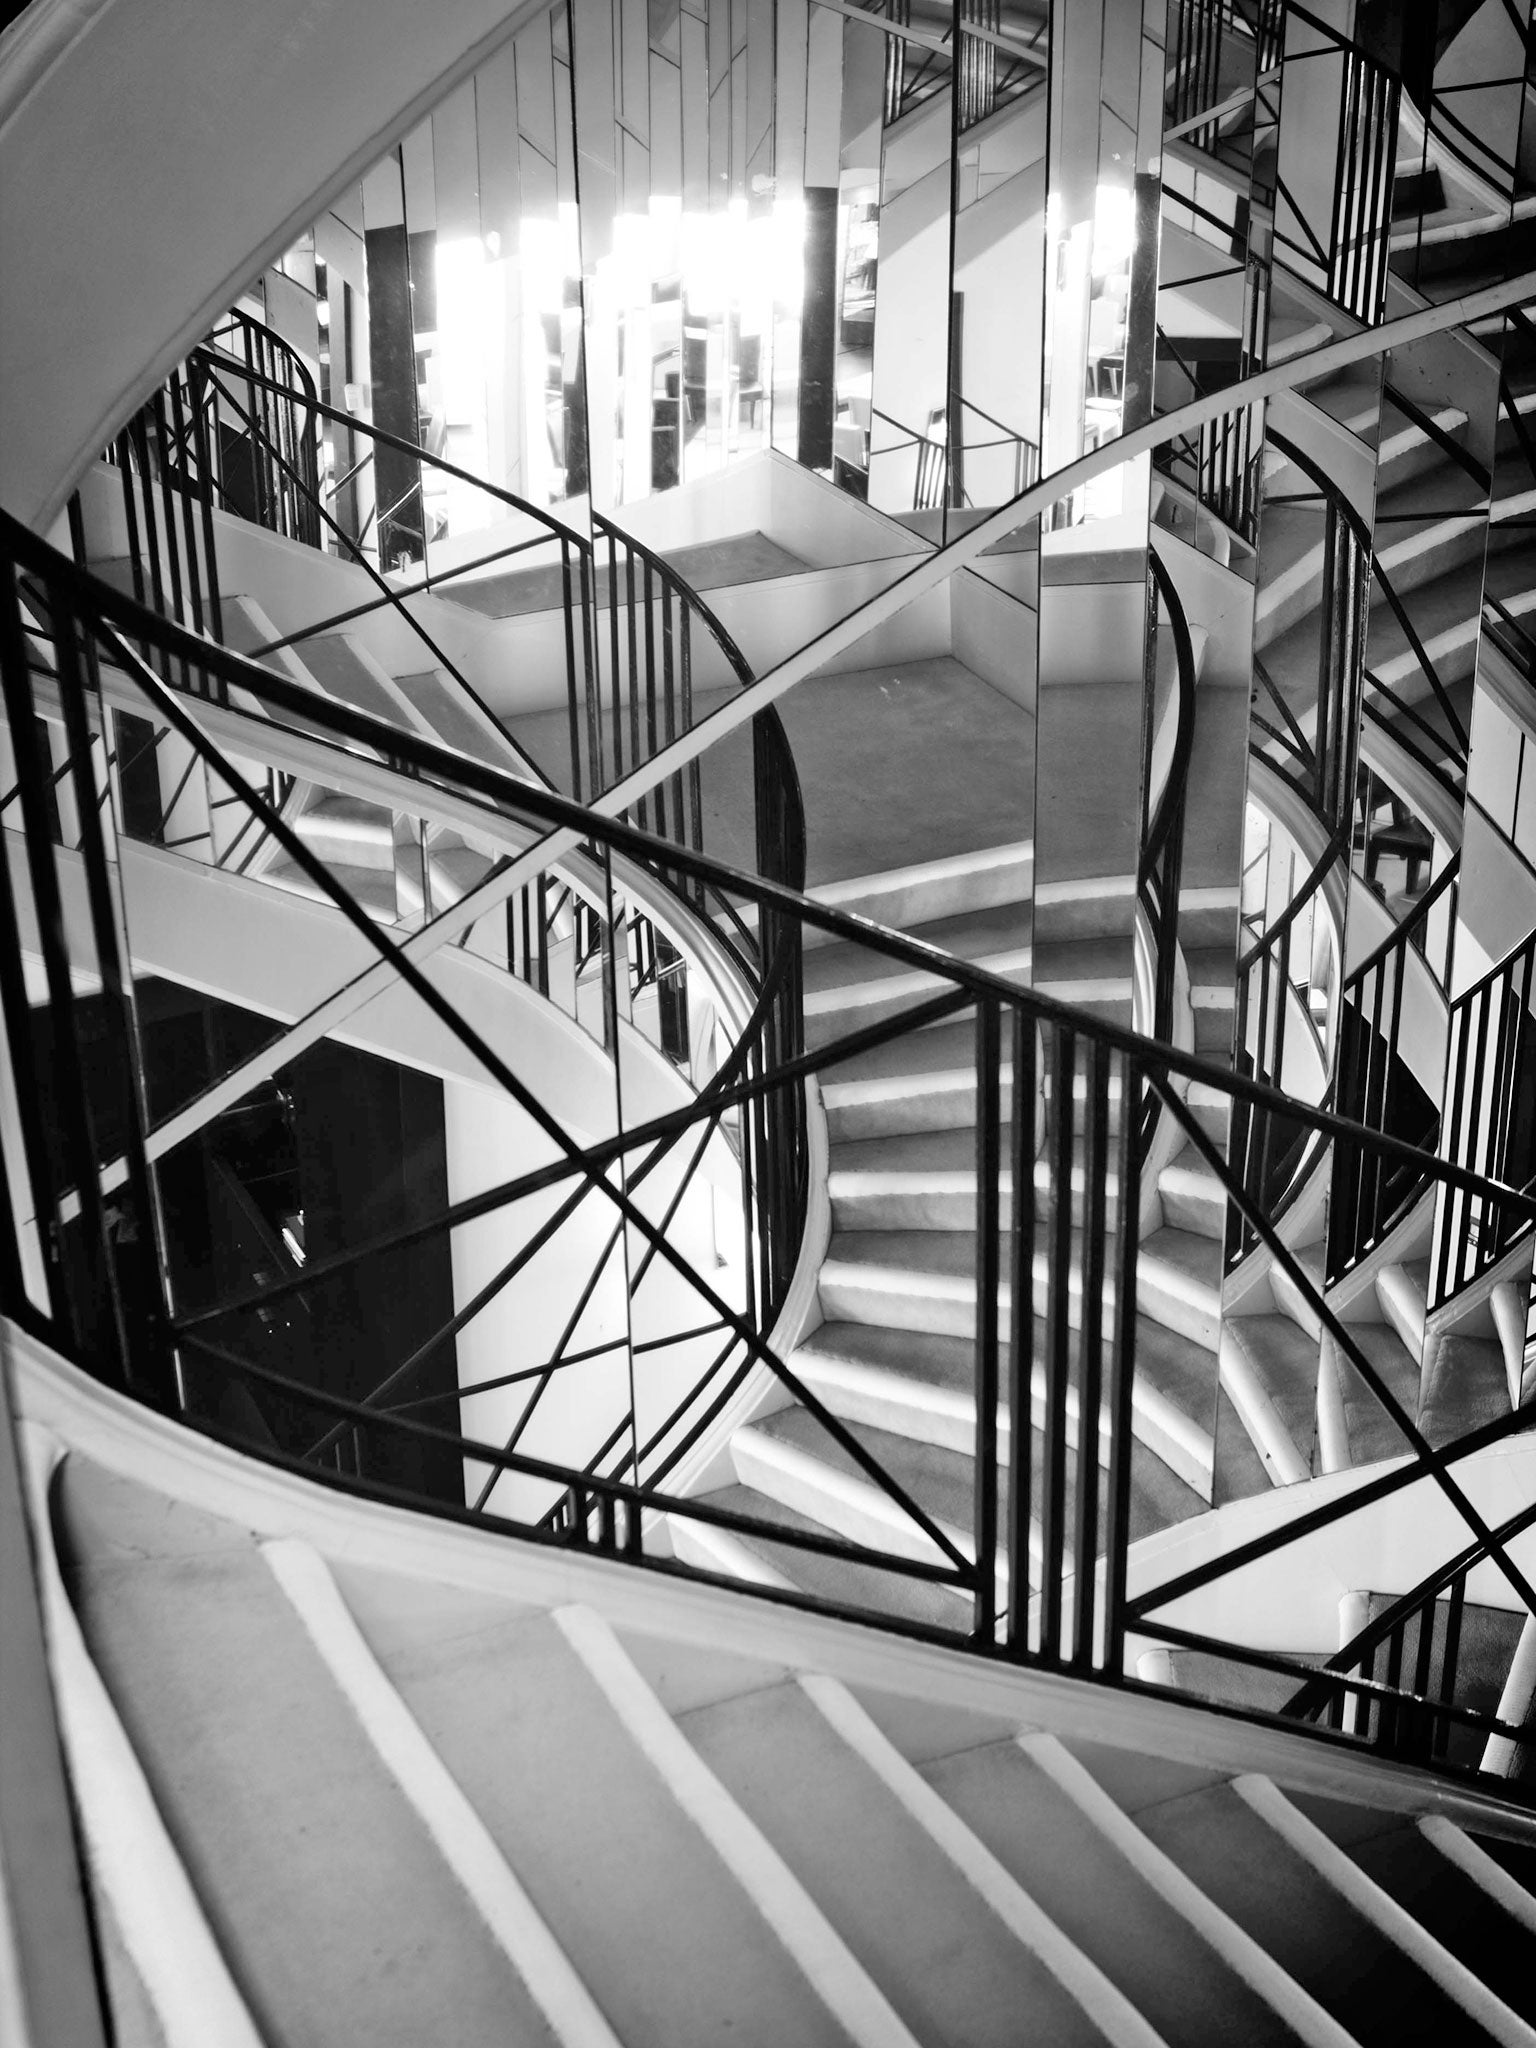 The hallowed mirrored staircase leading up to Coco Chanel's Paris preserved apartment